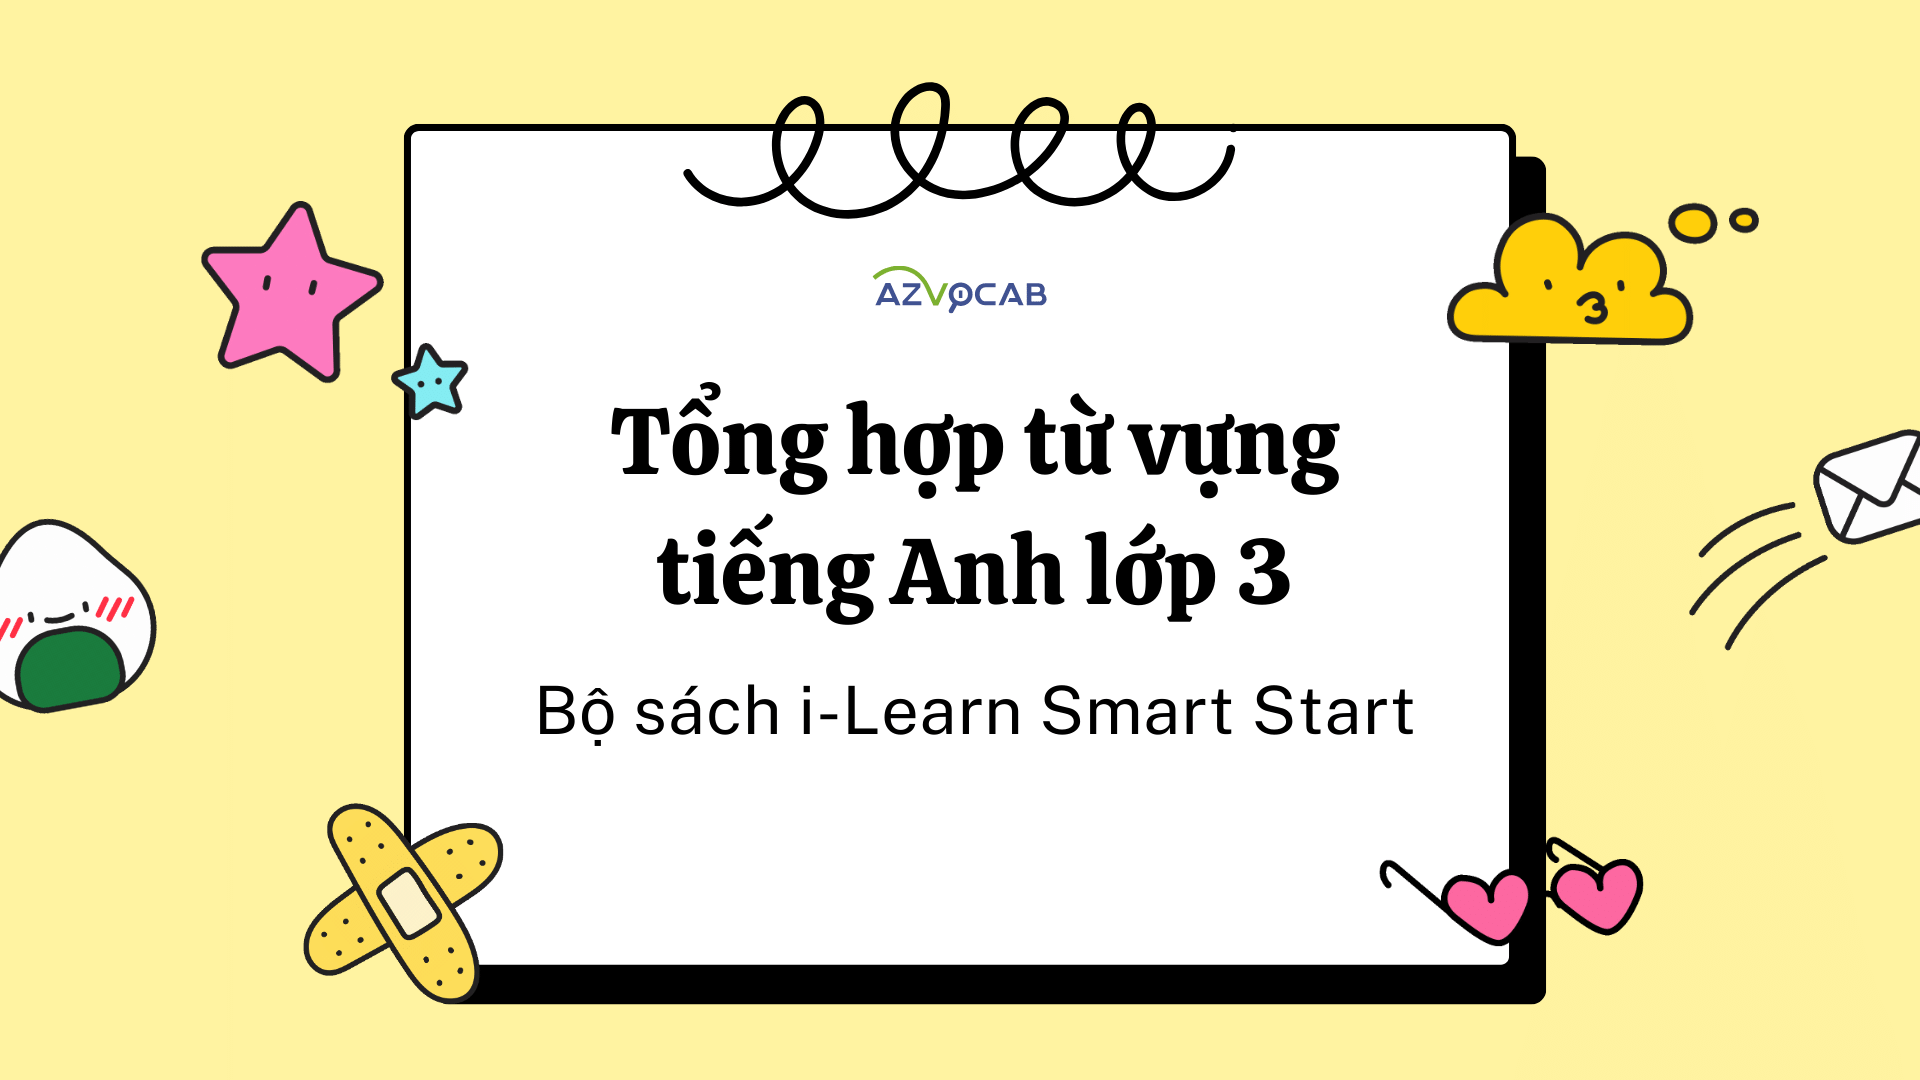 Tiếng Anh lớp 3 i-Learn Smart Start